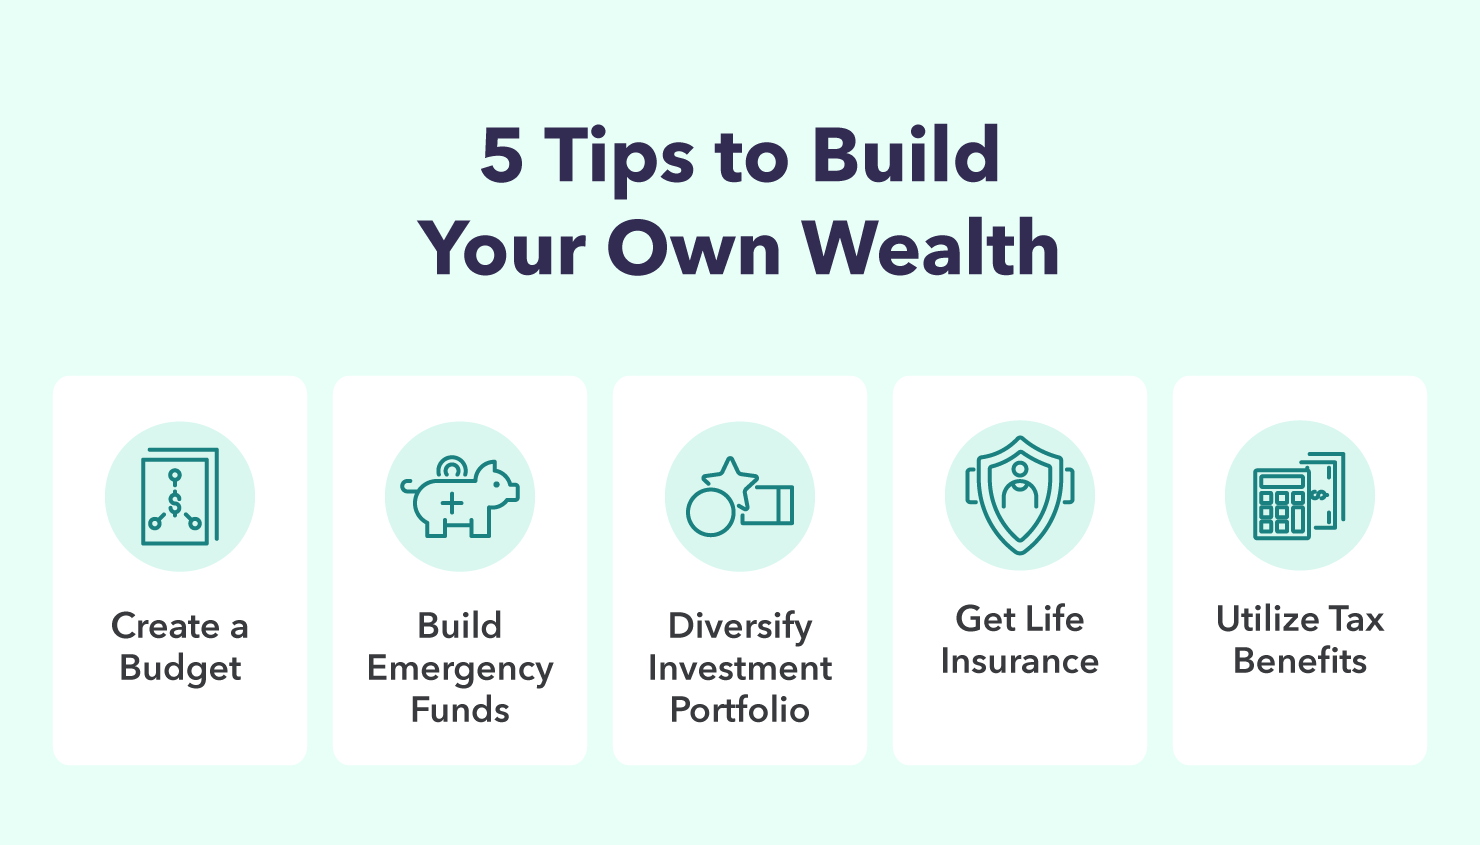 5 wealth-building tips: create a budget, build emergency funds, diversify investment portfolio, get life insurance, utilize tax benefits. 